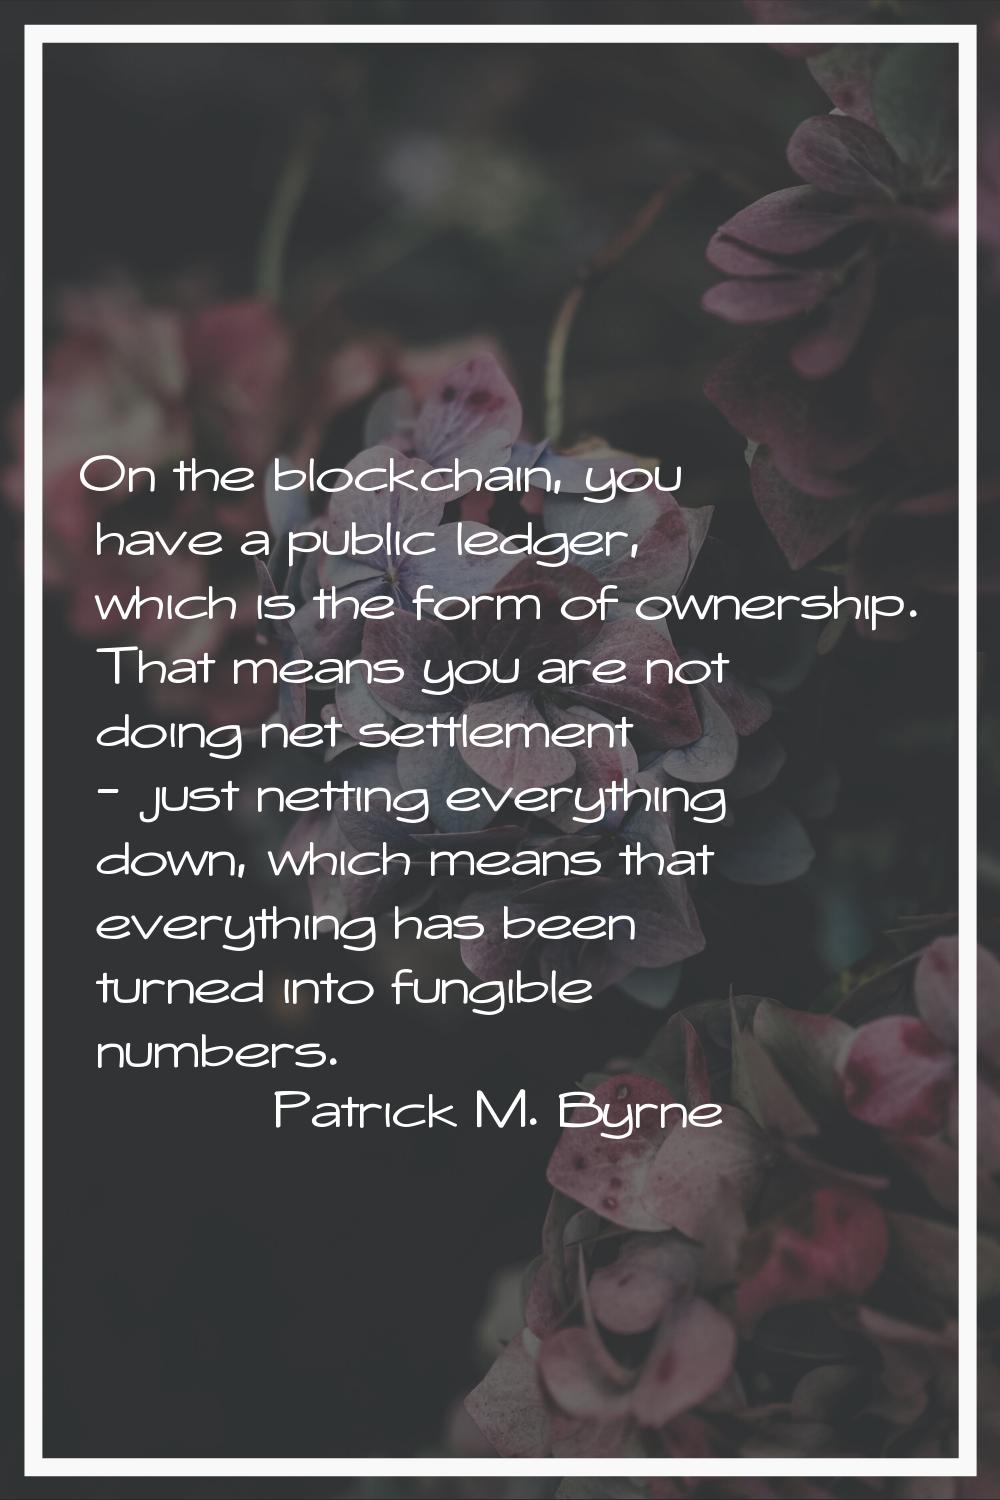 On the blockchain, you have a public ledger, which is the form of ownership. That means you are not